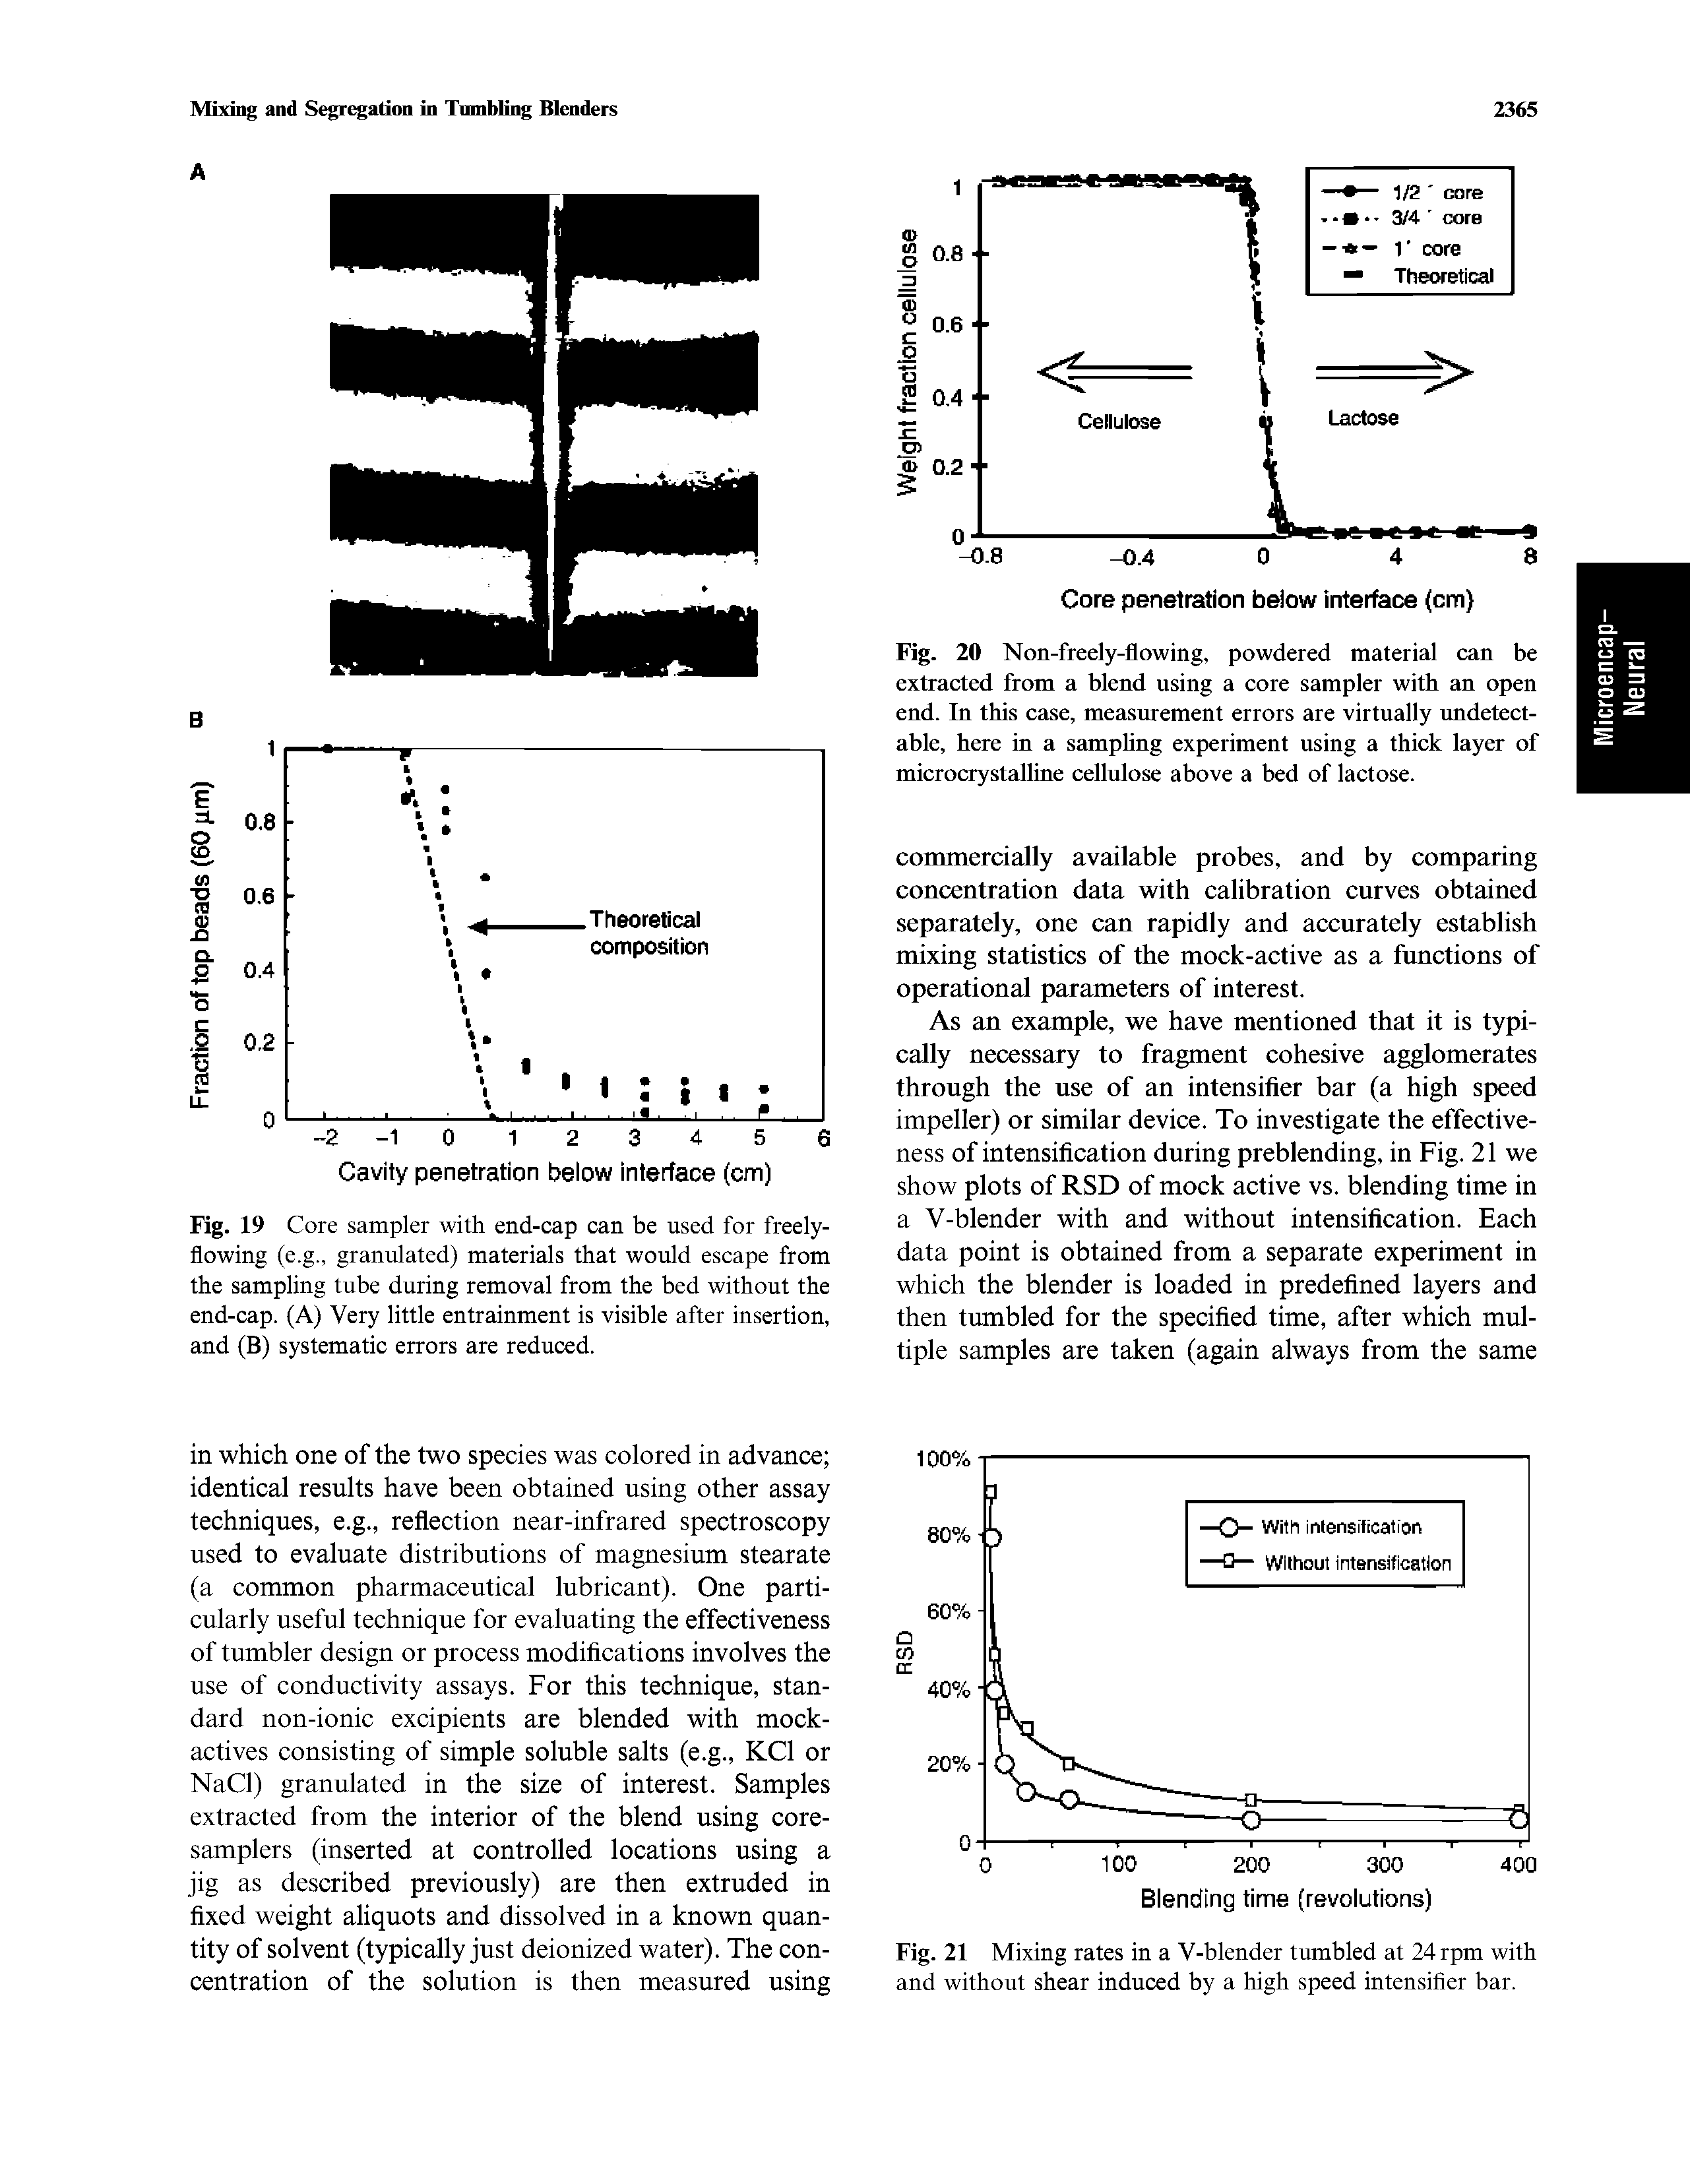 Fig. 19 Core sampler with end-cap can be used for freely-flowing (e.g., granulated) materials that would escape from the sampling tube during removal from the bed without the end-cap. (A) Very little entrainment is visible after insertion, and (B) systematic errors are reduced.